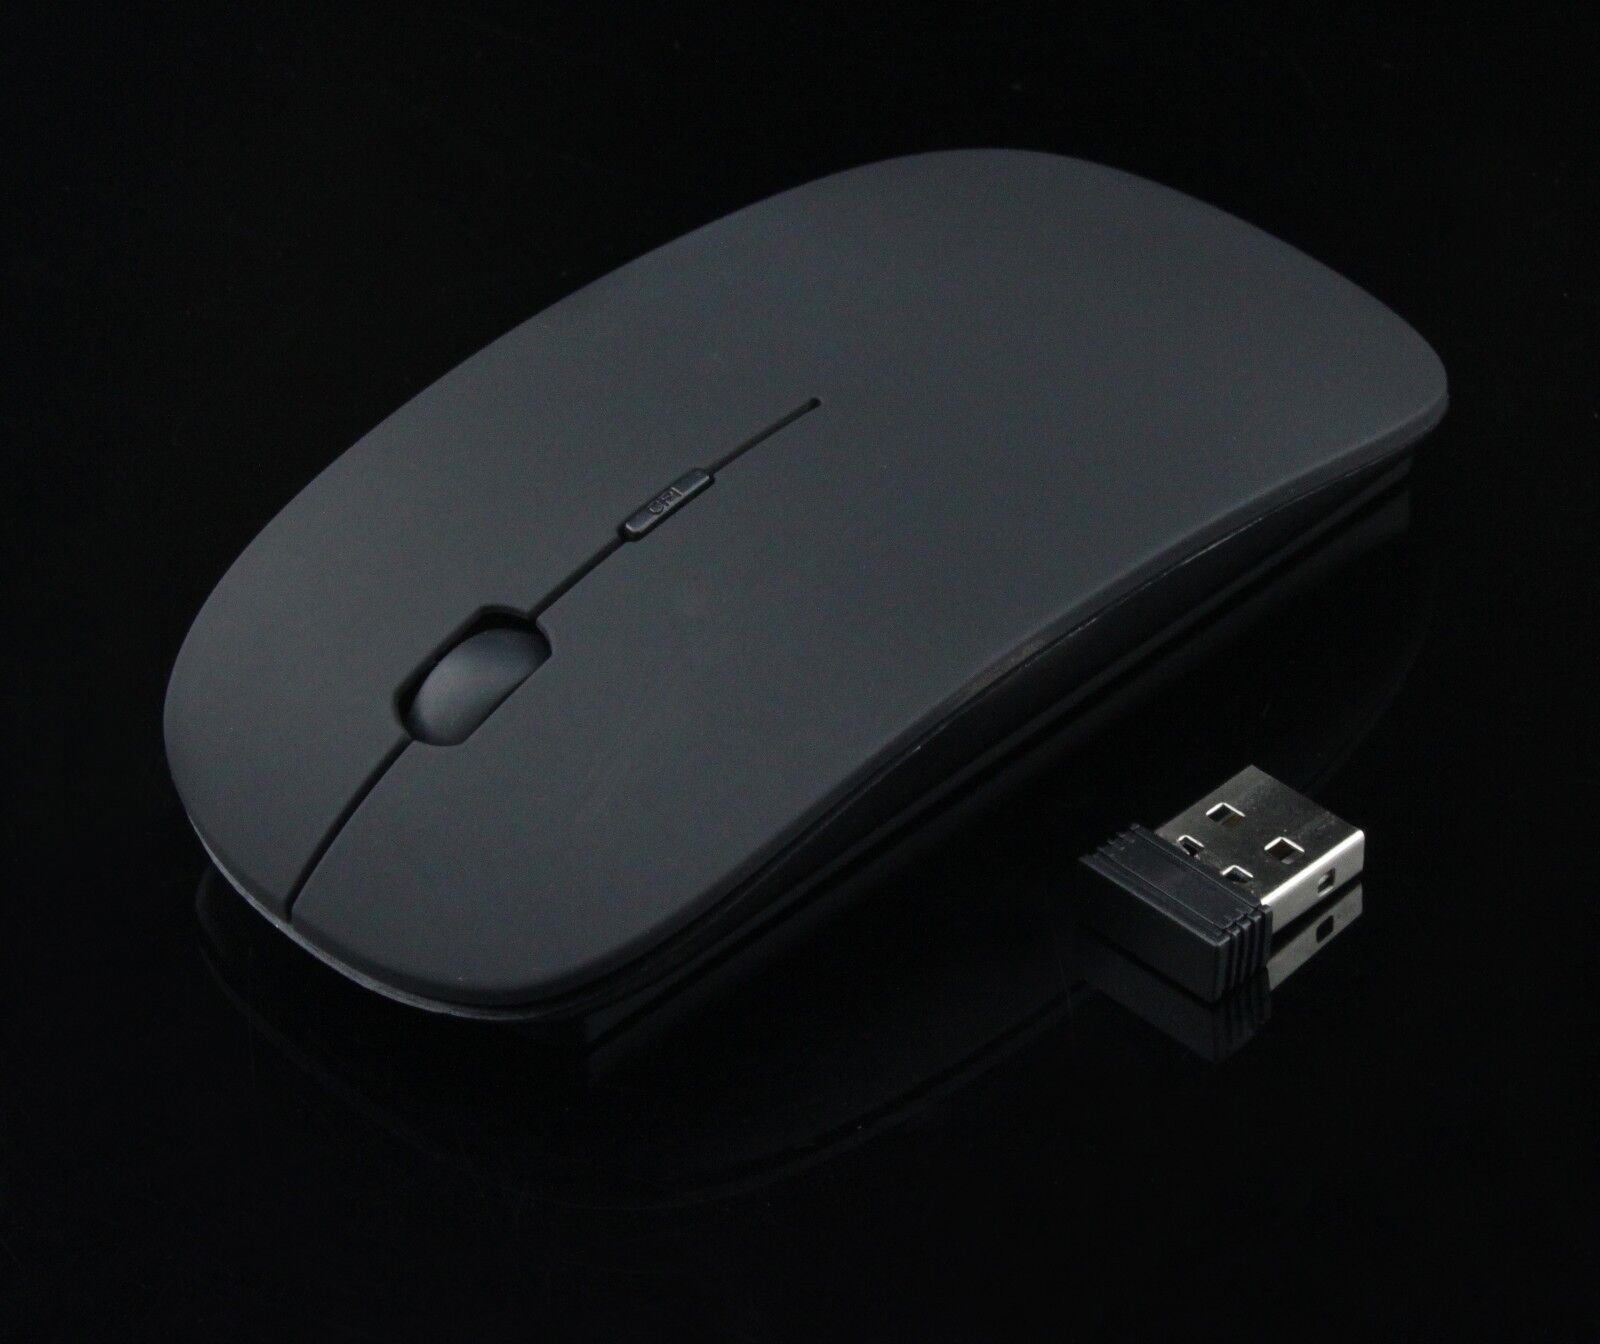 2.4GHz High Quality Wireless Optical Mouse/Mice + USB 2.0 Receiver for PC Laptop